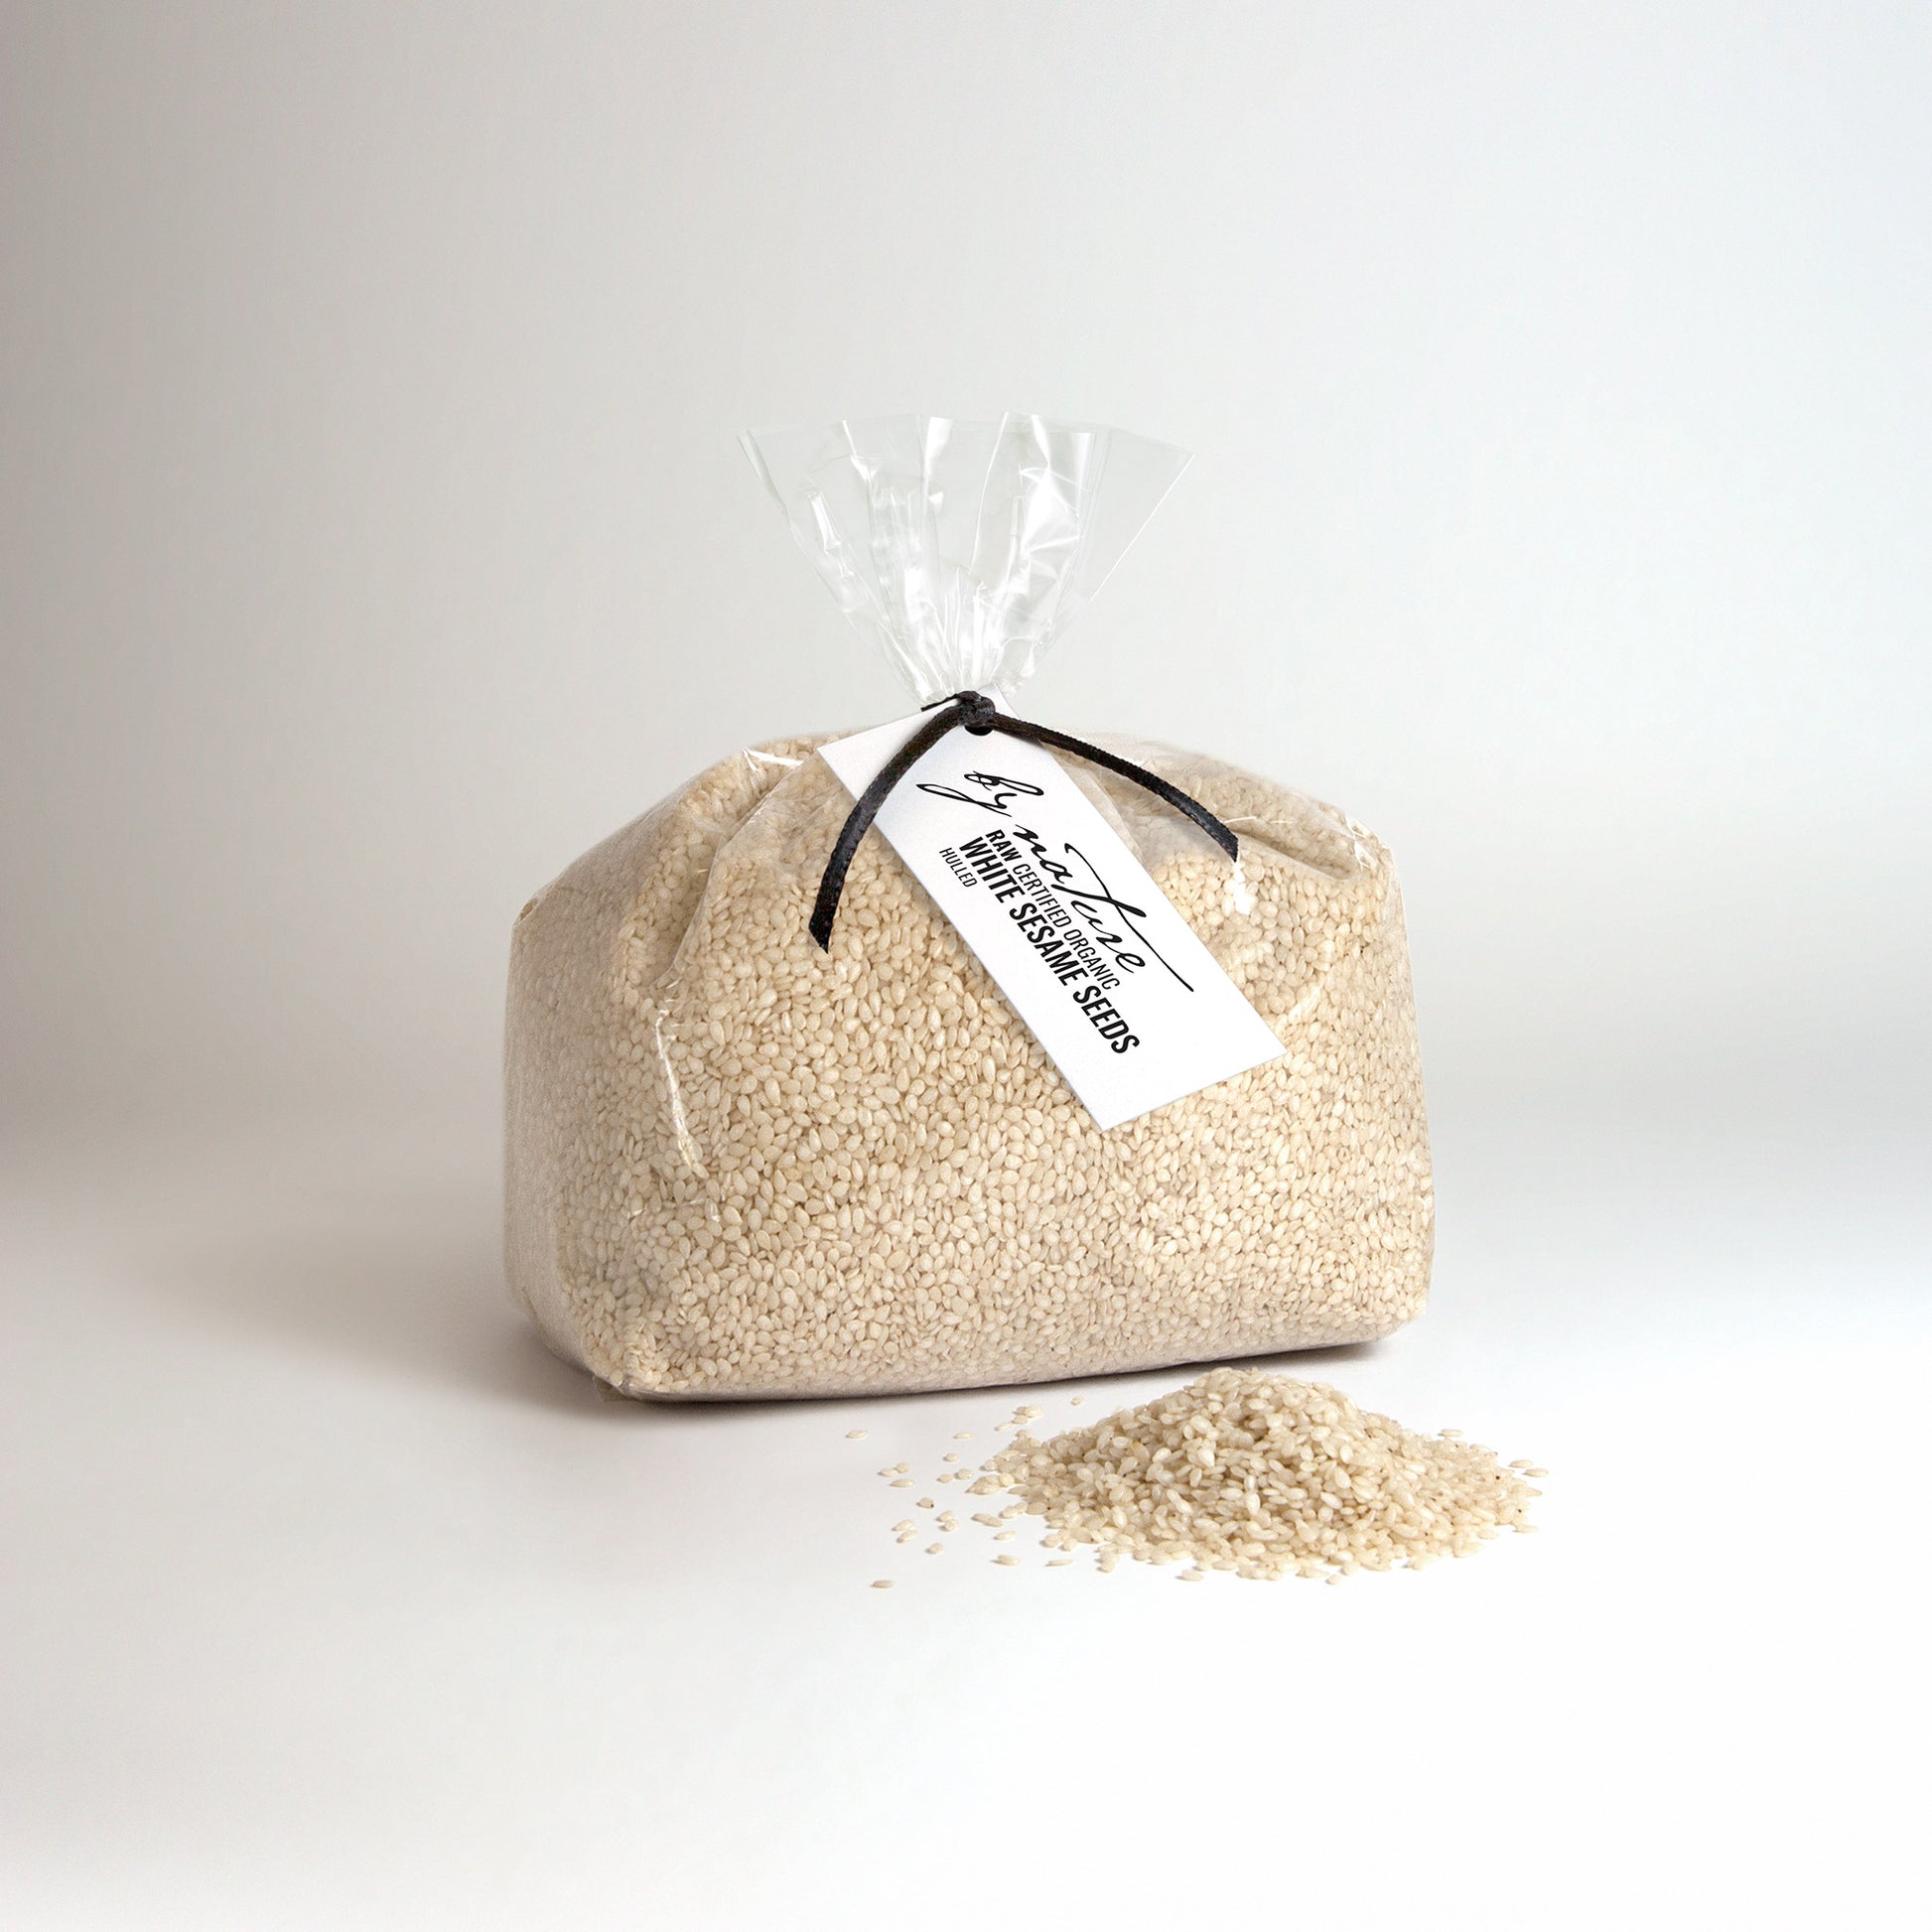 BY NATURE Sesame Seeds, 500g - hulled, raw, certified organic at source.